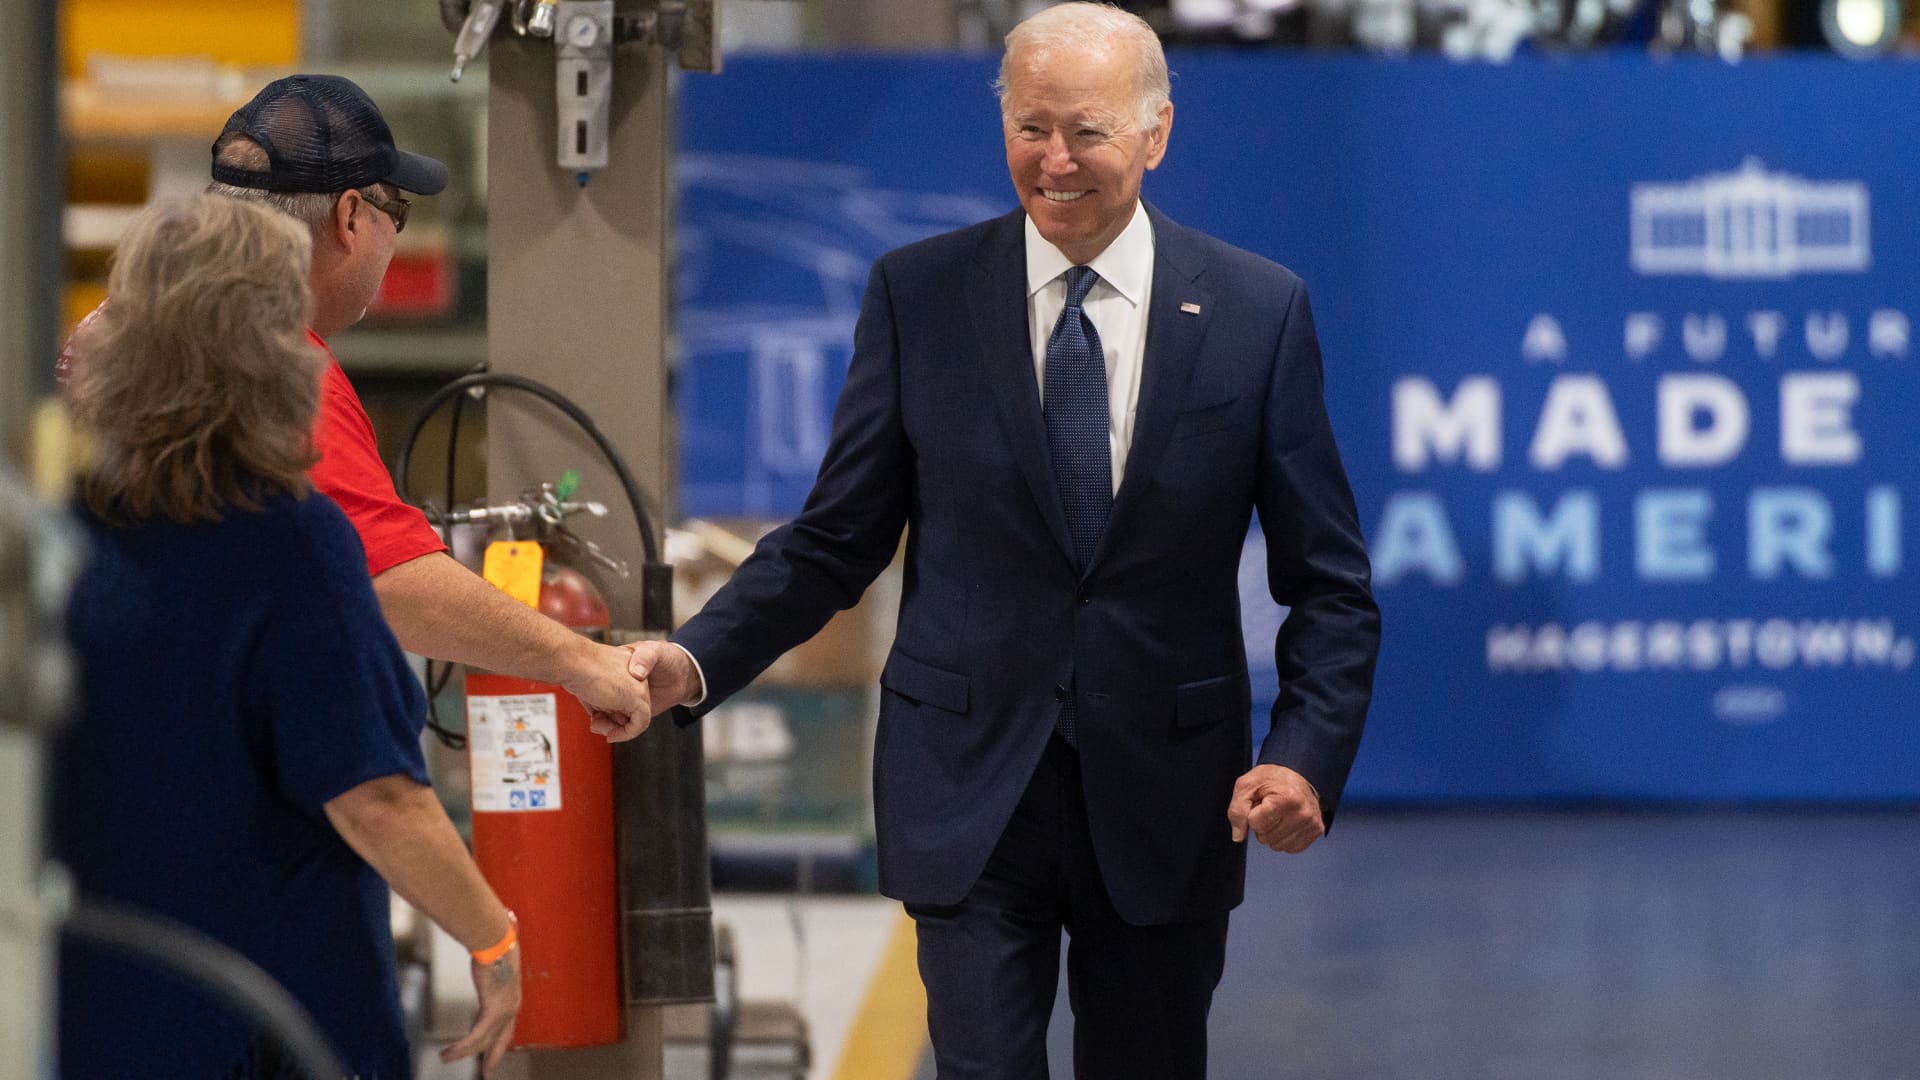 Biden says he doesn't think there will be a recession, if so it will be 'very slight'